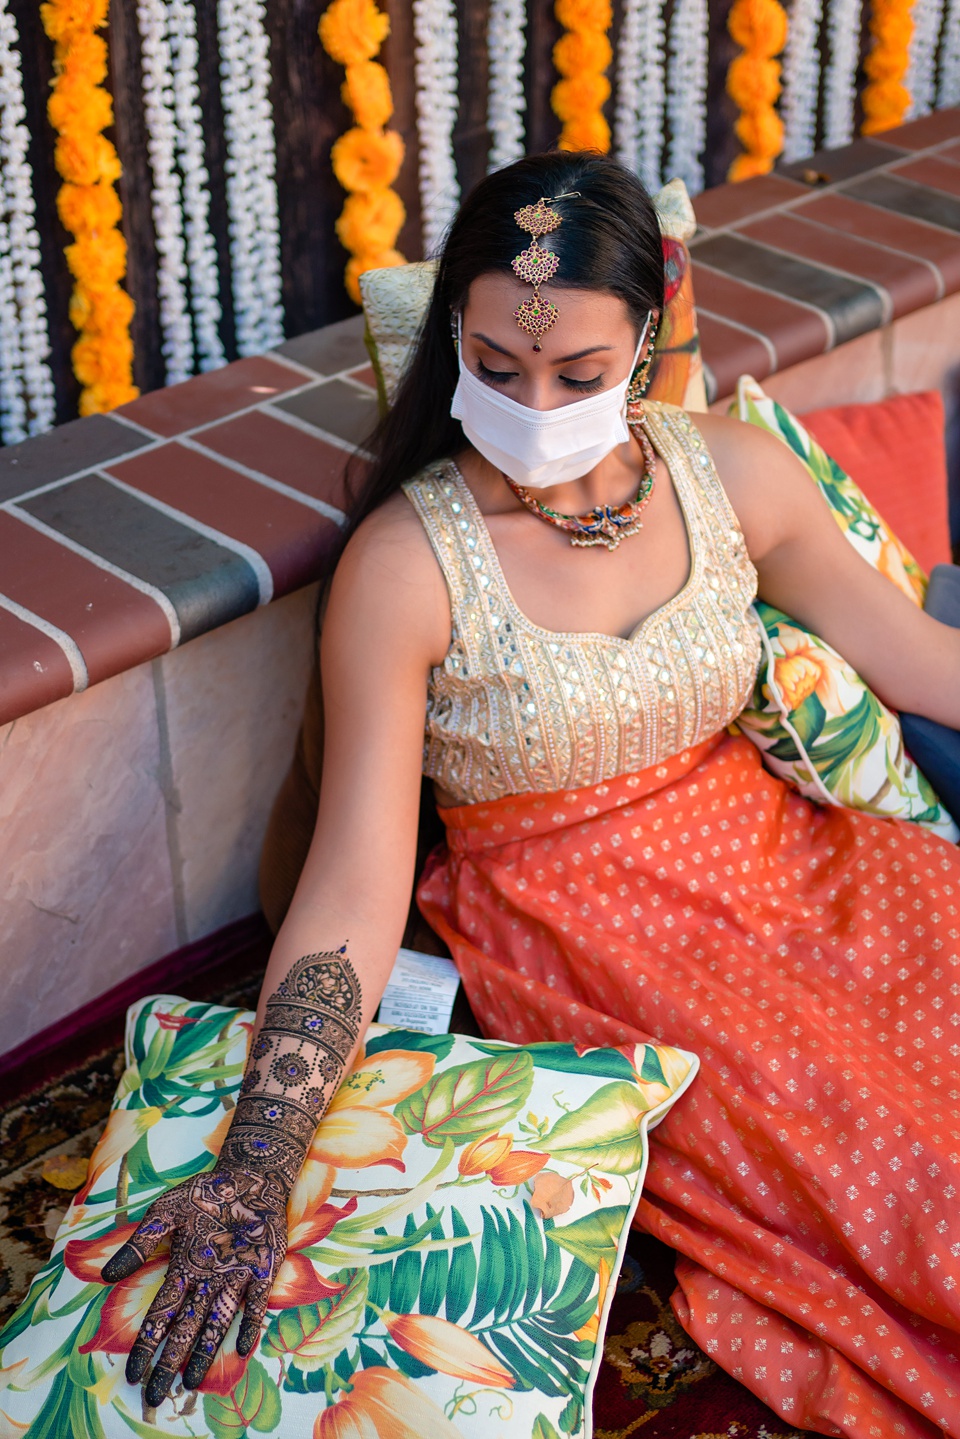 12 Sweet Bridal Poses to Steal {Styled Shoot} – The Big Fat Indian Wedding